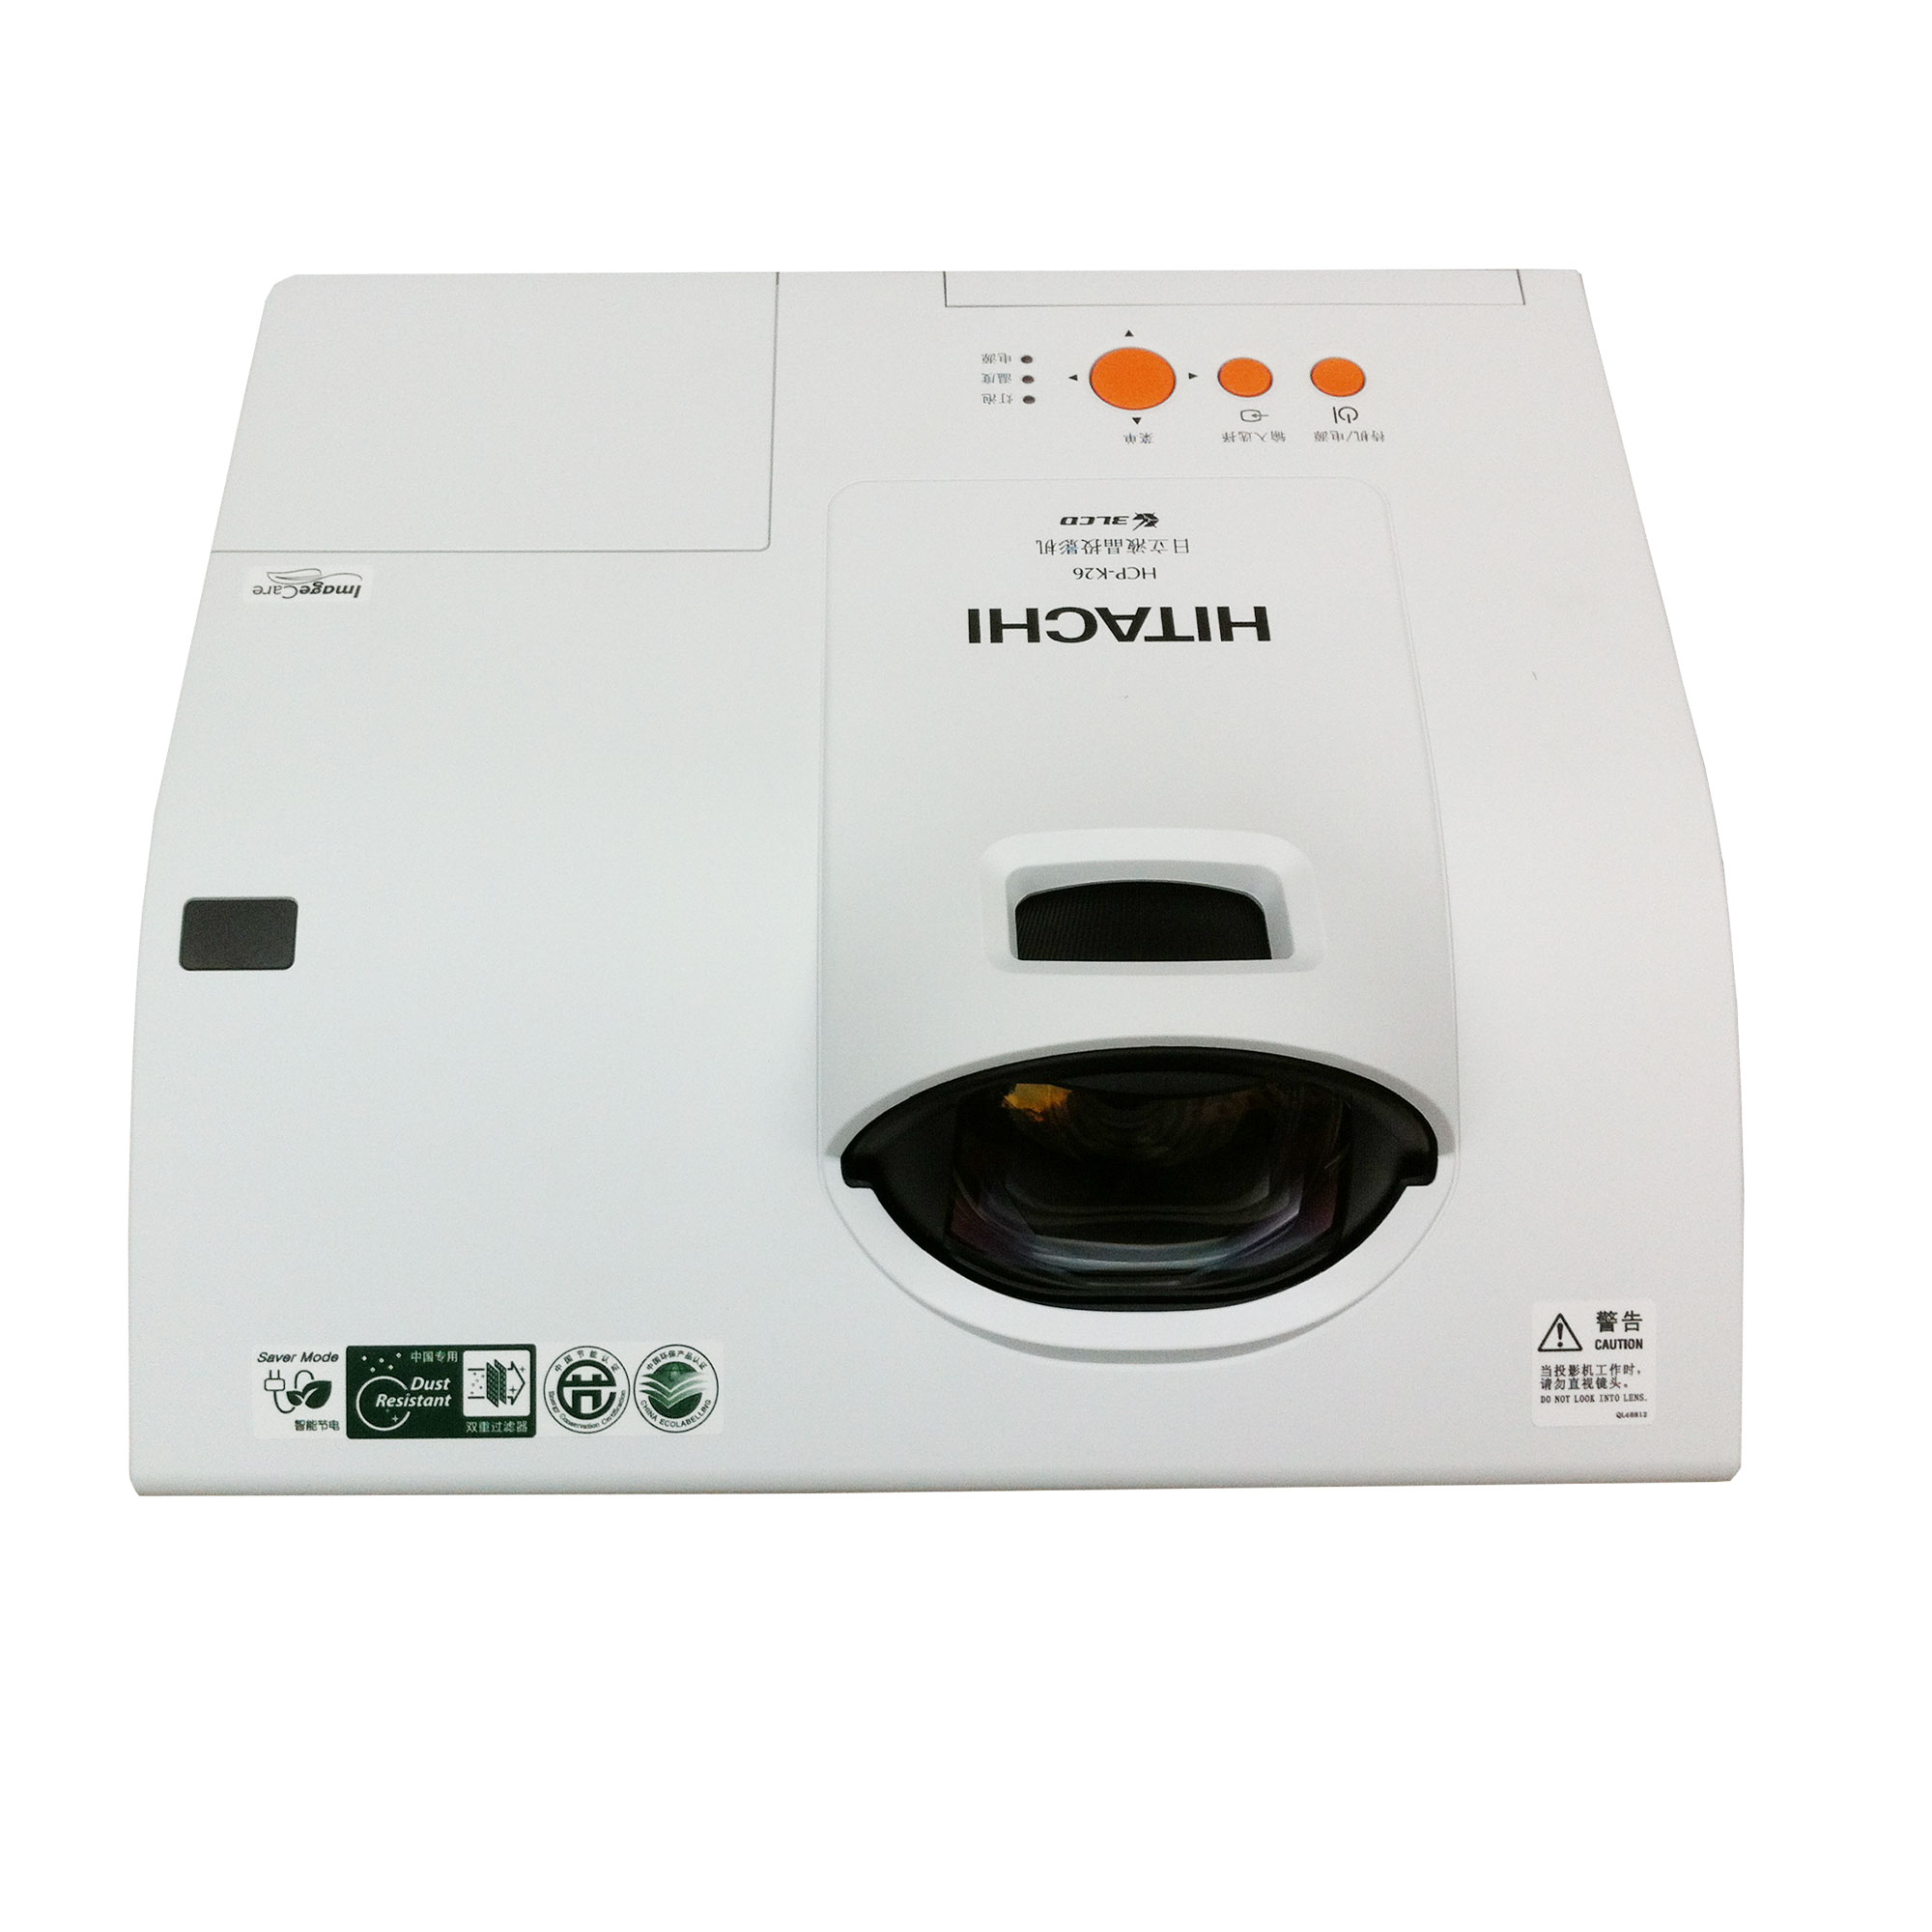 M650 short-focus projector HD projector with interactive whiteboard substitute L25 / L26